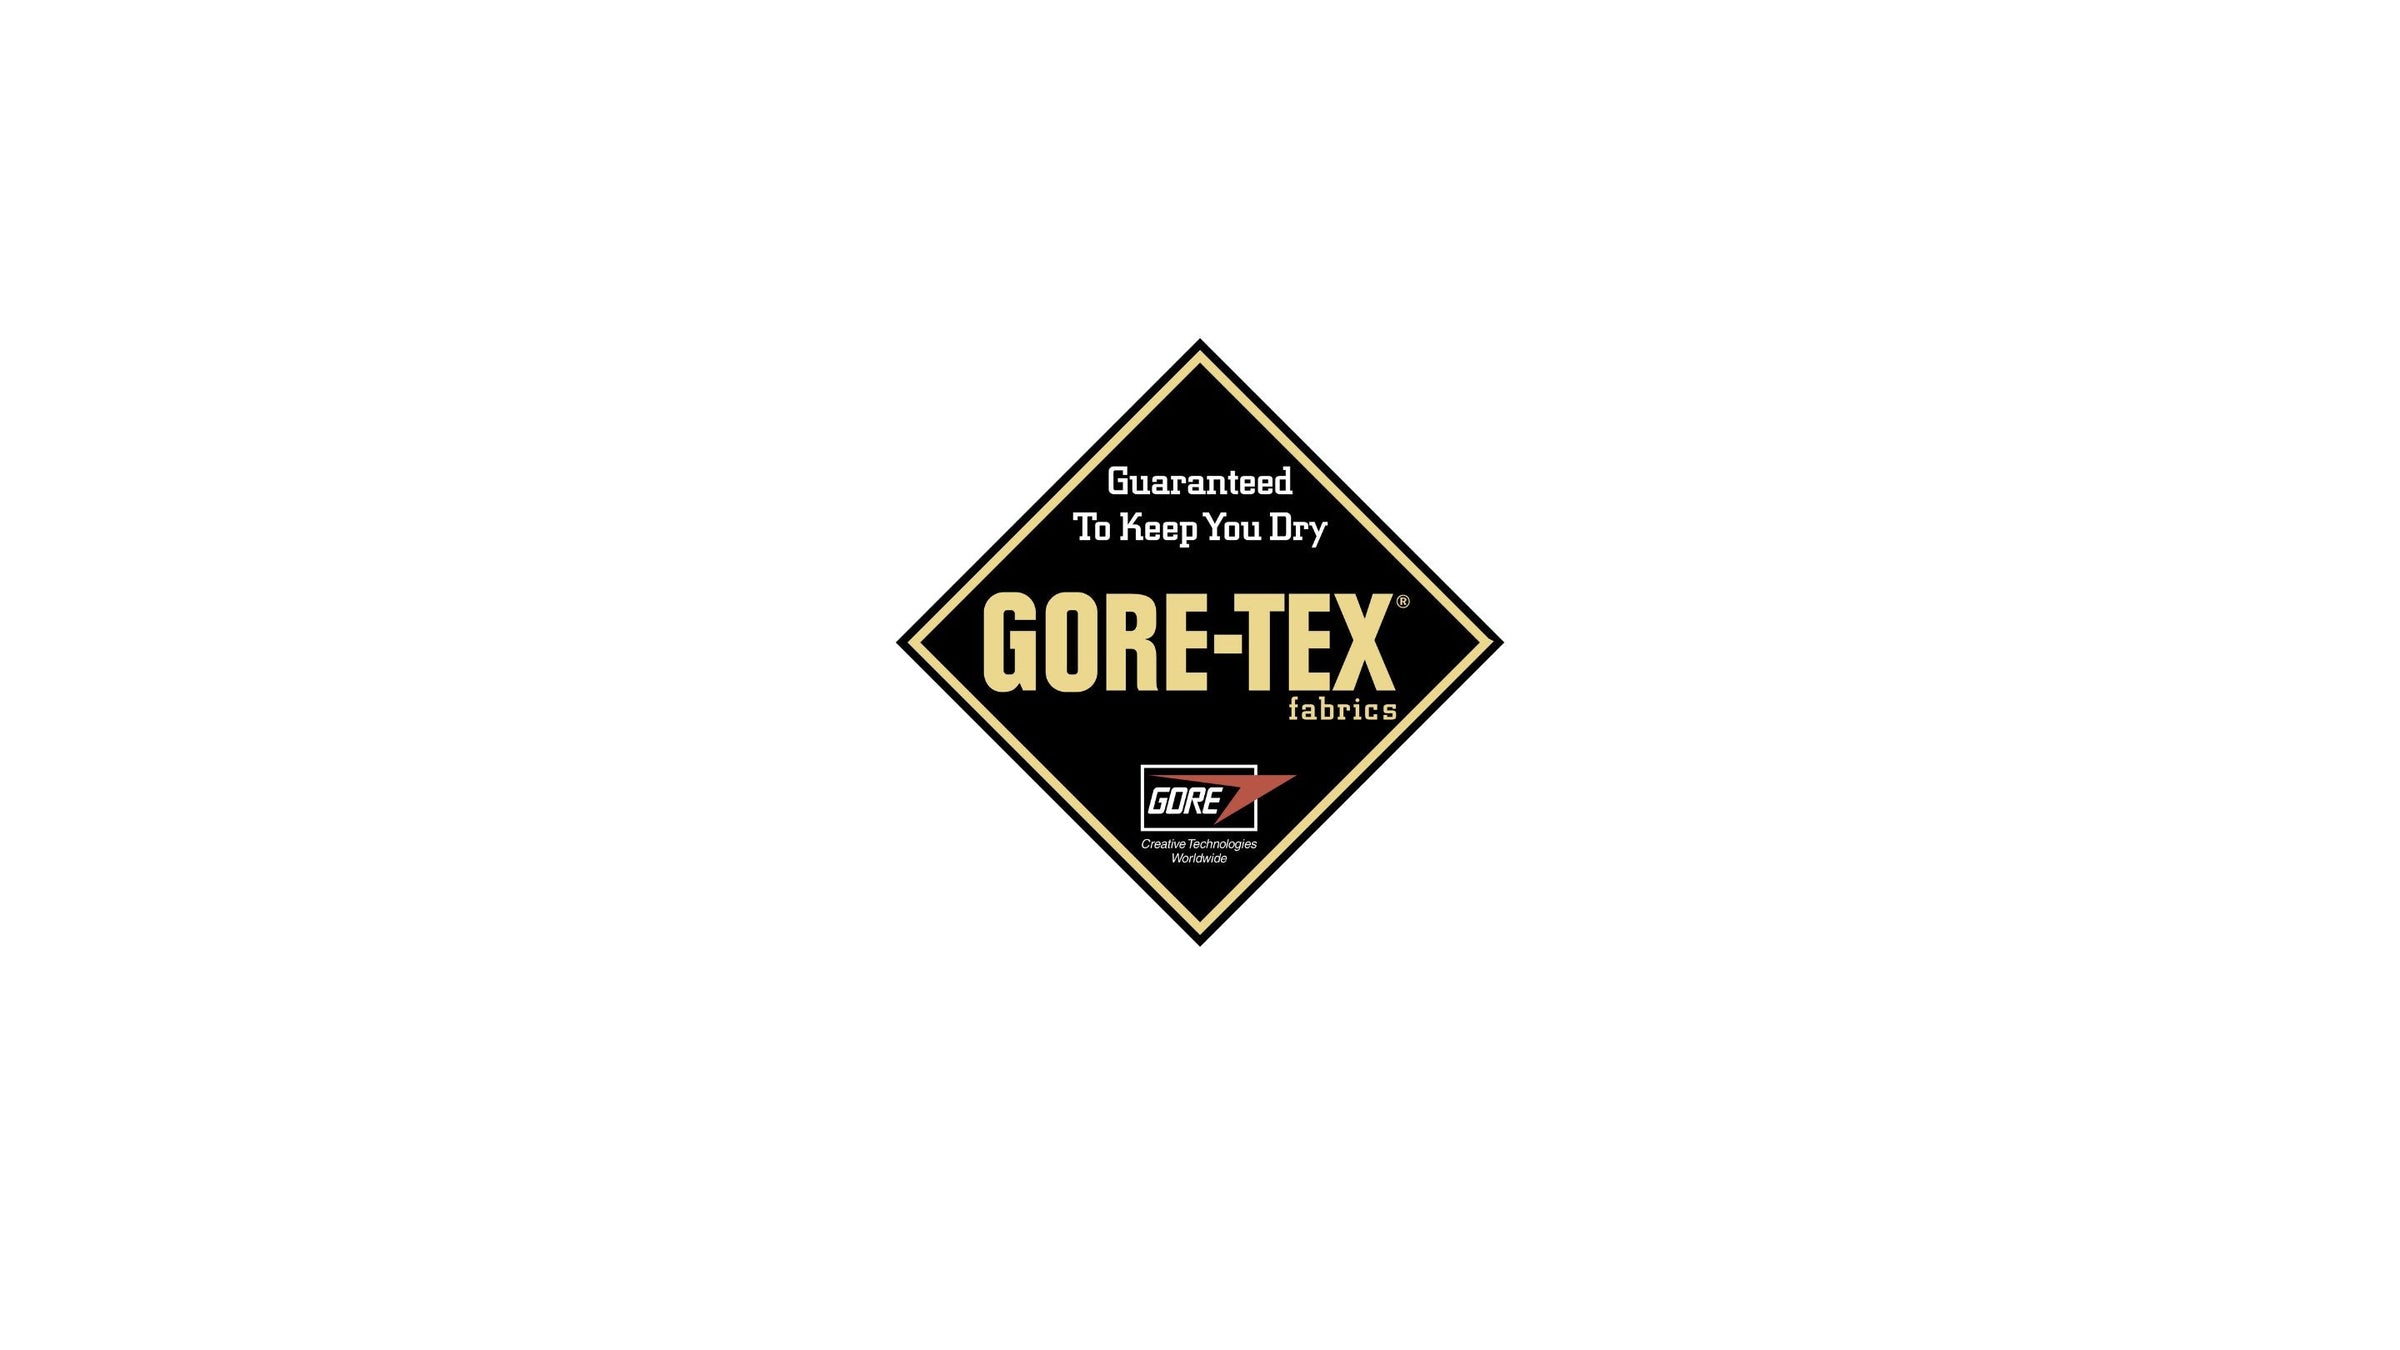 Image of the Gore-Tex Safety Boots collection from Workwear Gurus